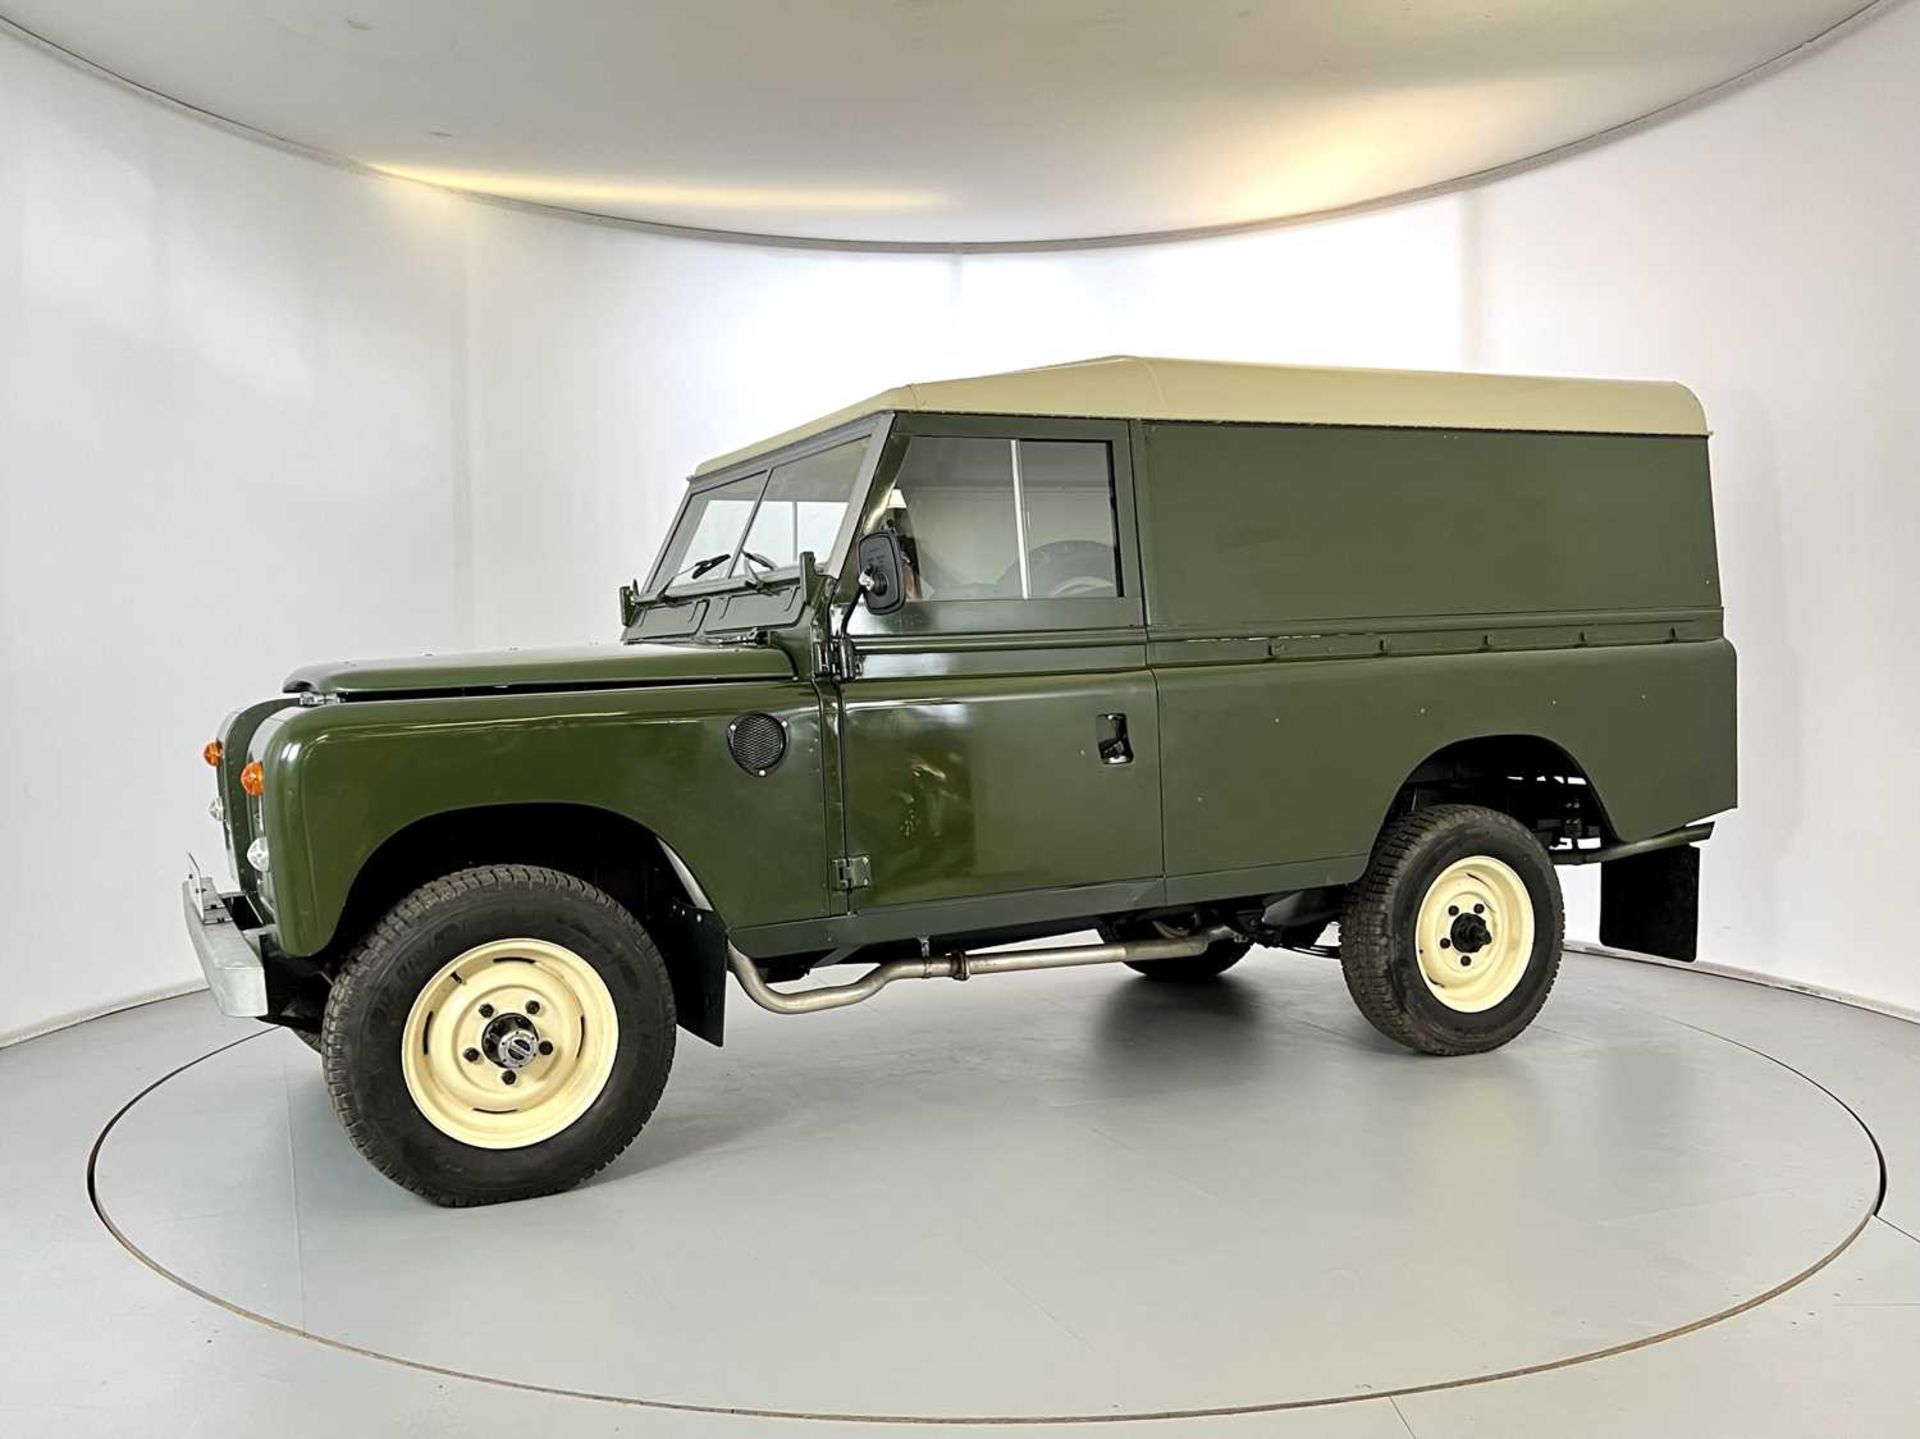 1981 Land Rover Series 3 - 6 Cylinder - Image 4 of 31